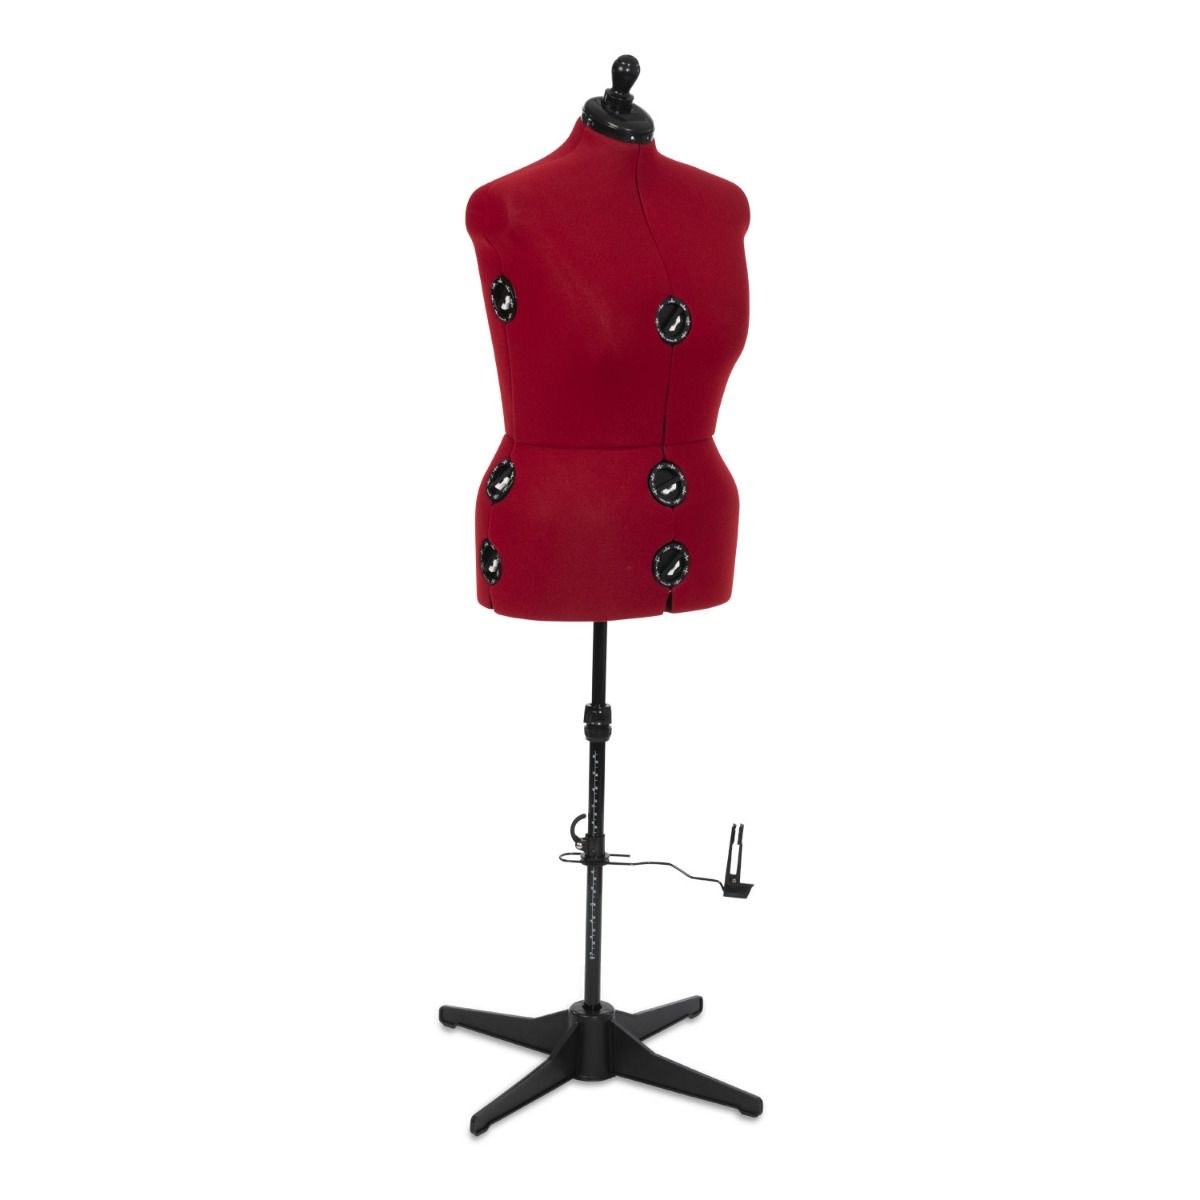 UK 8-16 Sewing Online 8-Part Adjustable Dressmakers Dummy in Red Size Small